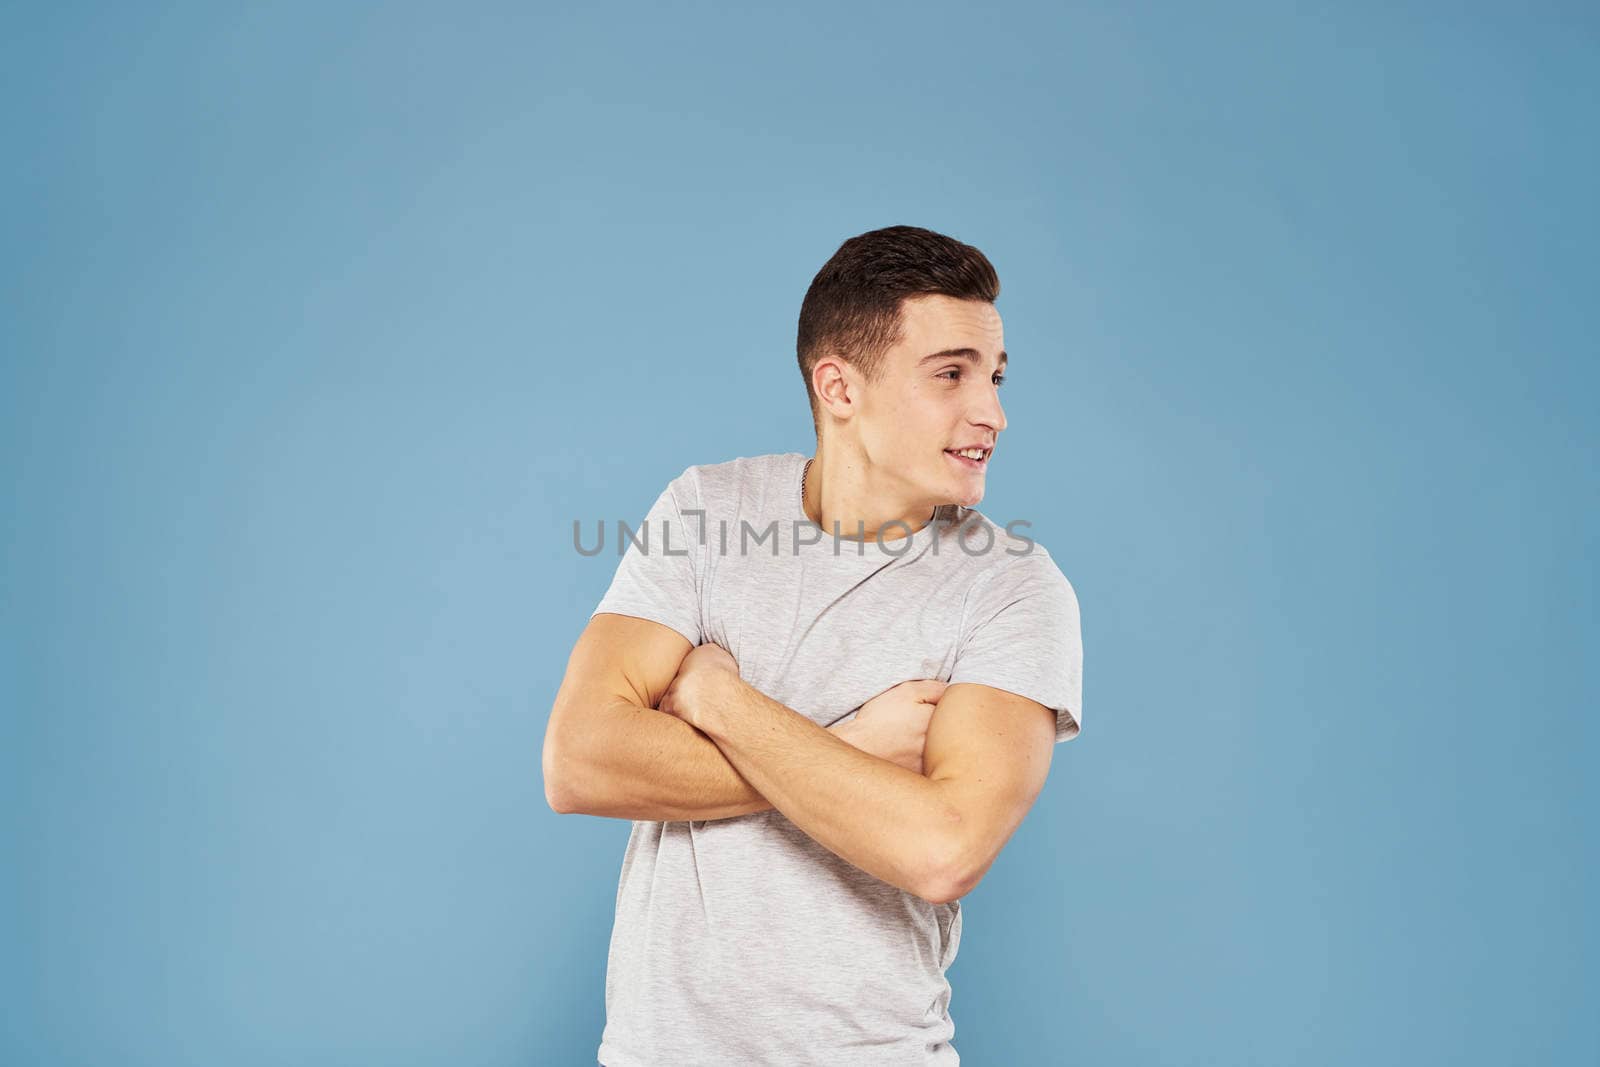 cheerful man in a white t-shirt gesturing with his hands emotions blue background. High quality photo